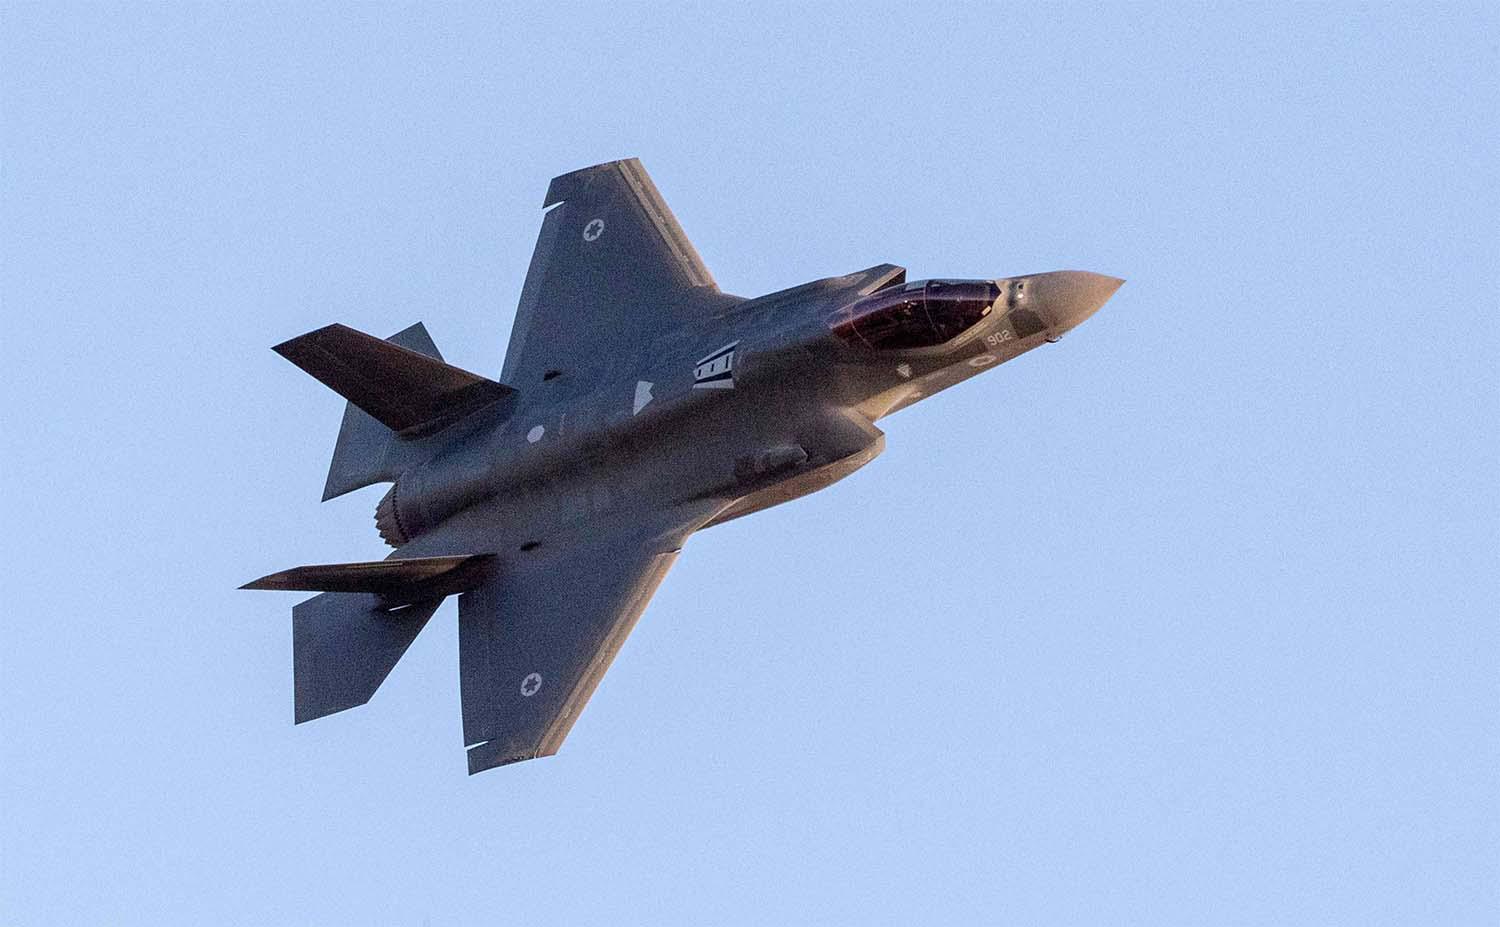 Israel has struck over 500 targets in Syria last year